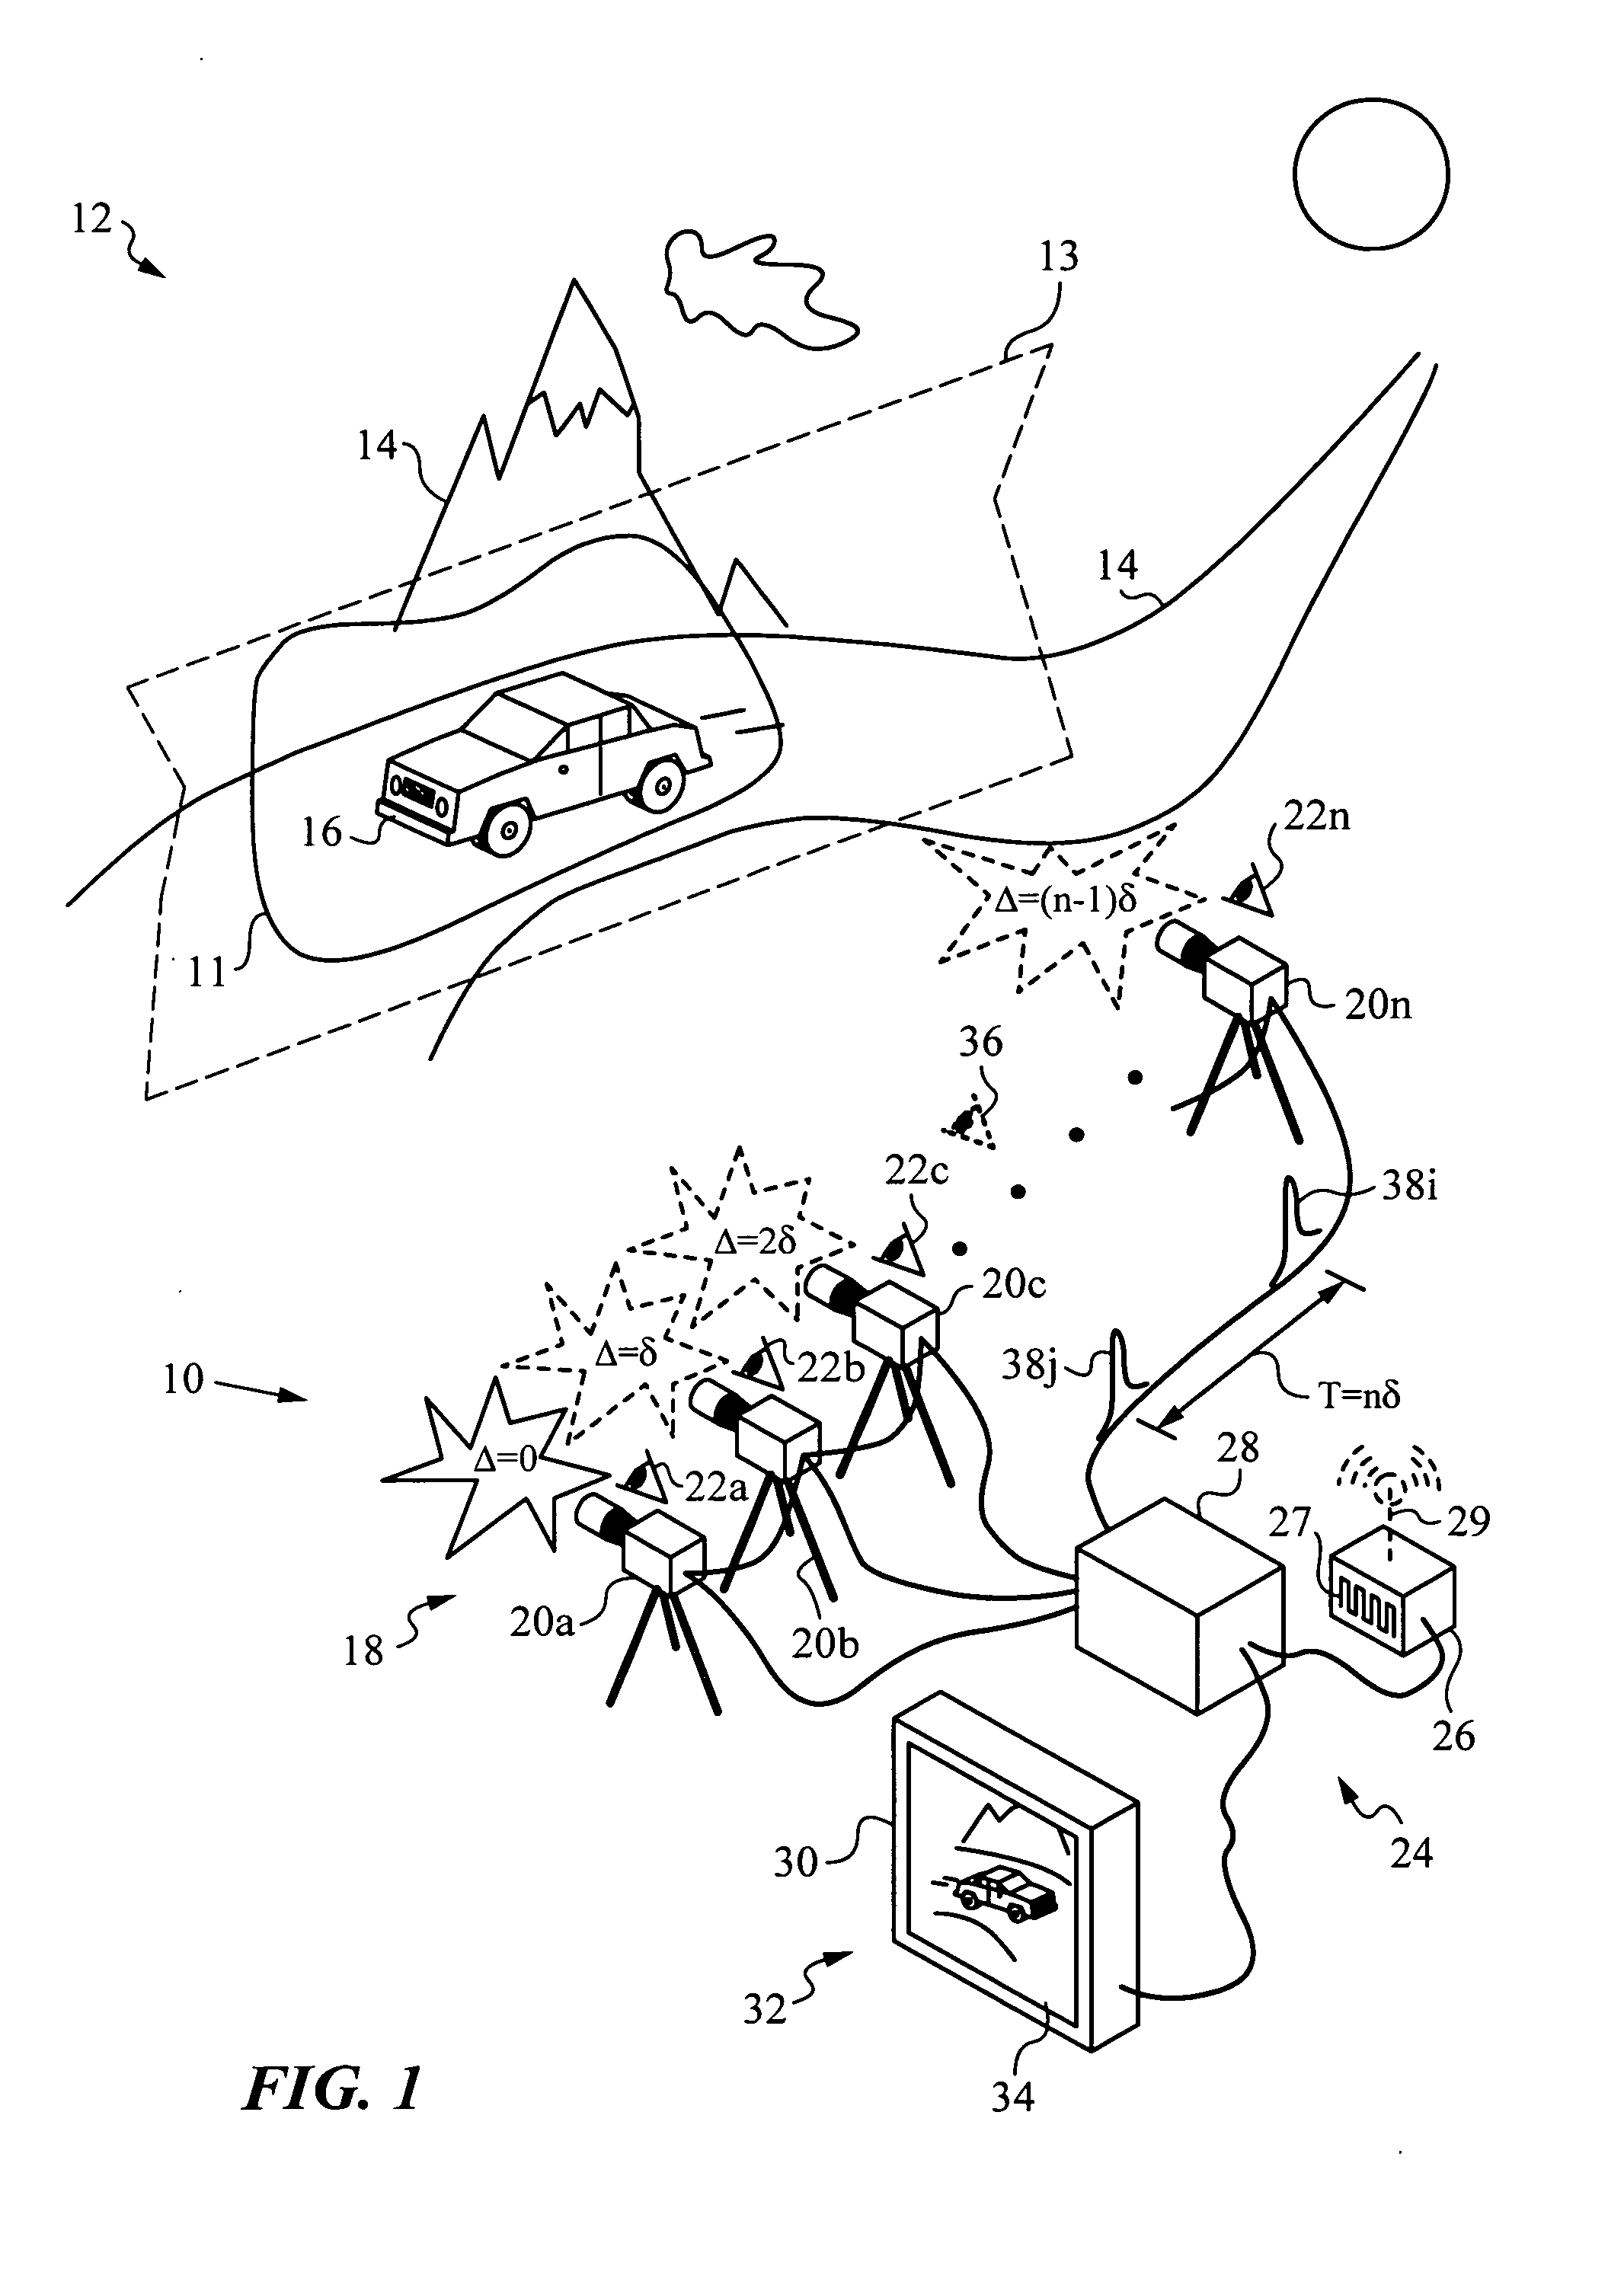 Apparatus and method for capturing a scene using staggered triggering of dense camera arrays